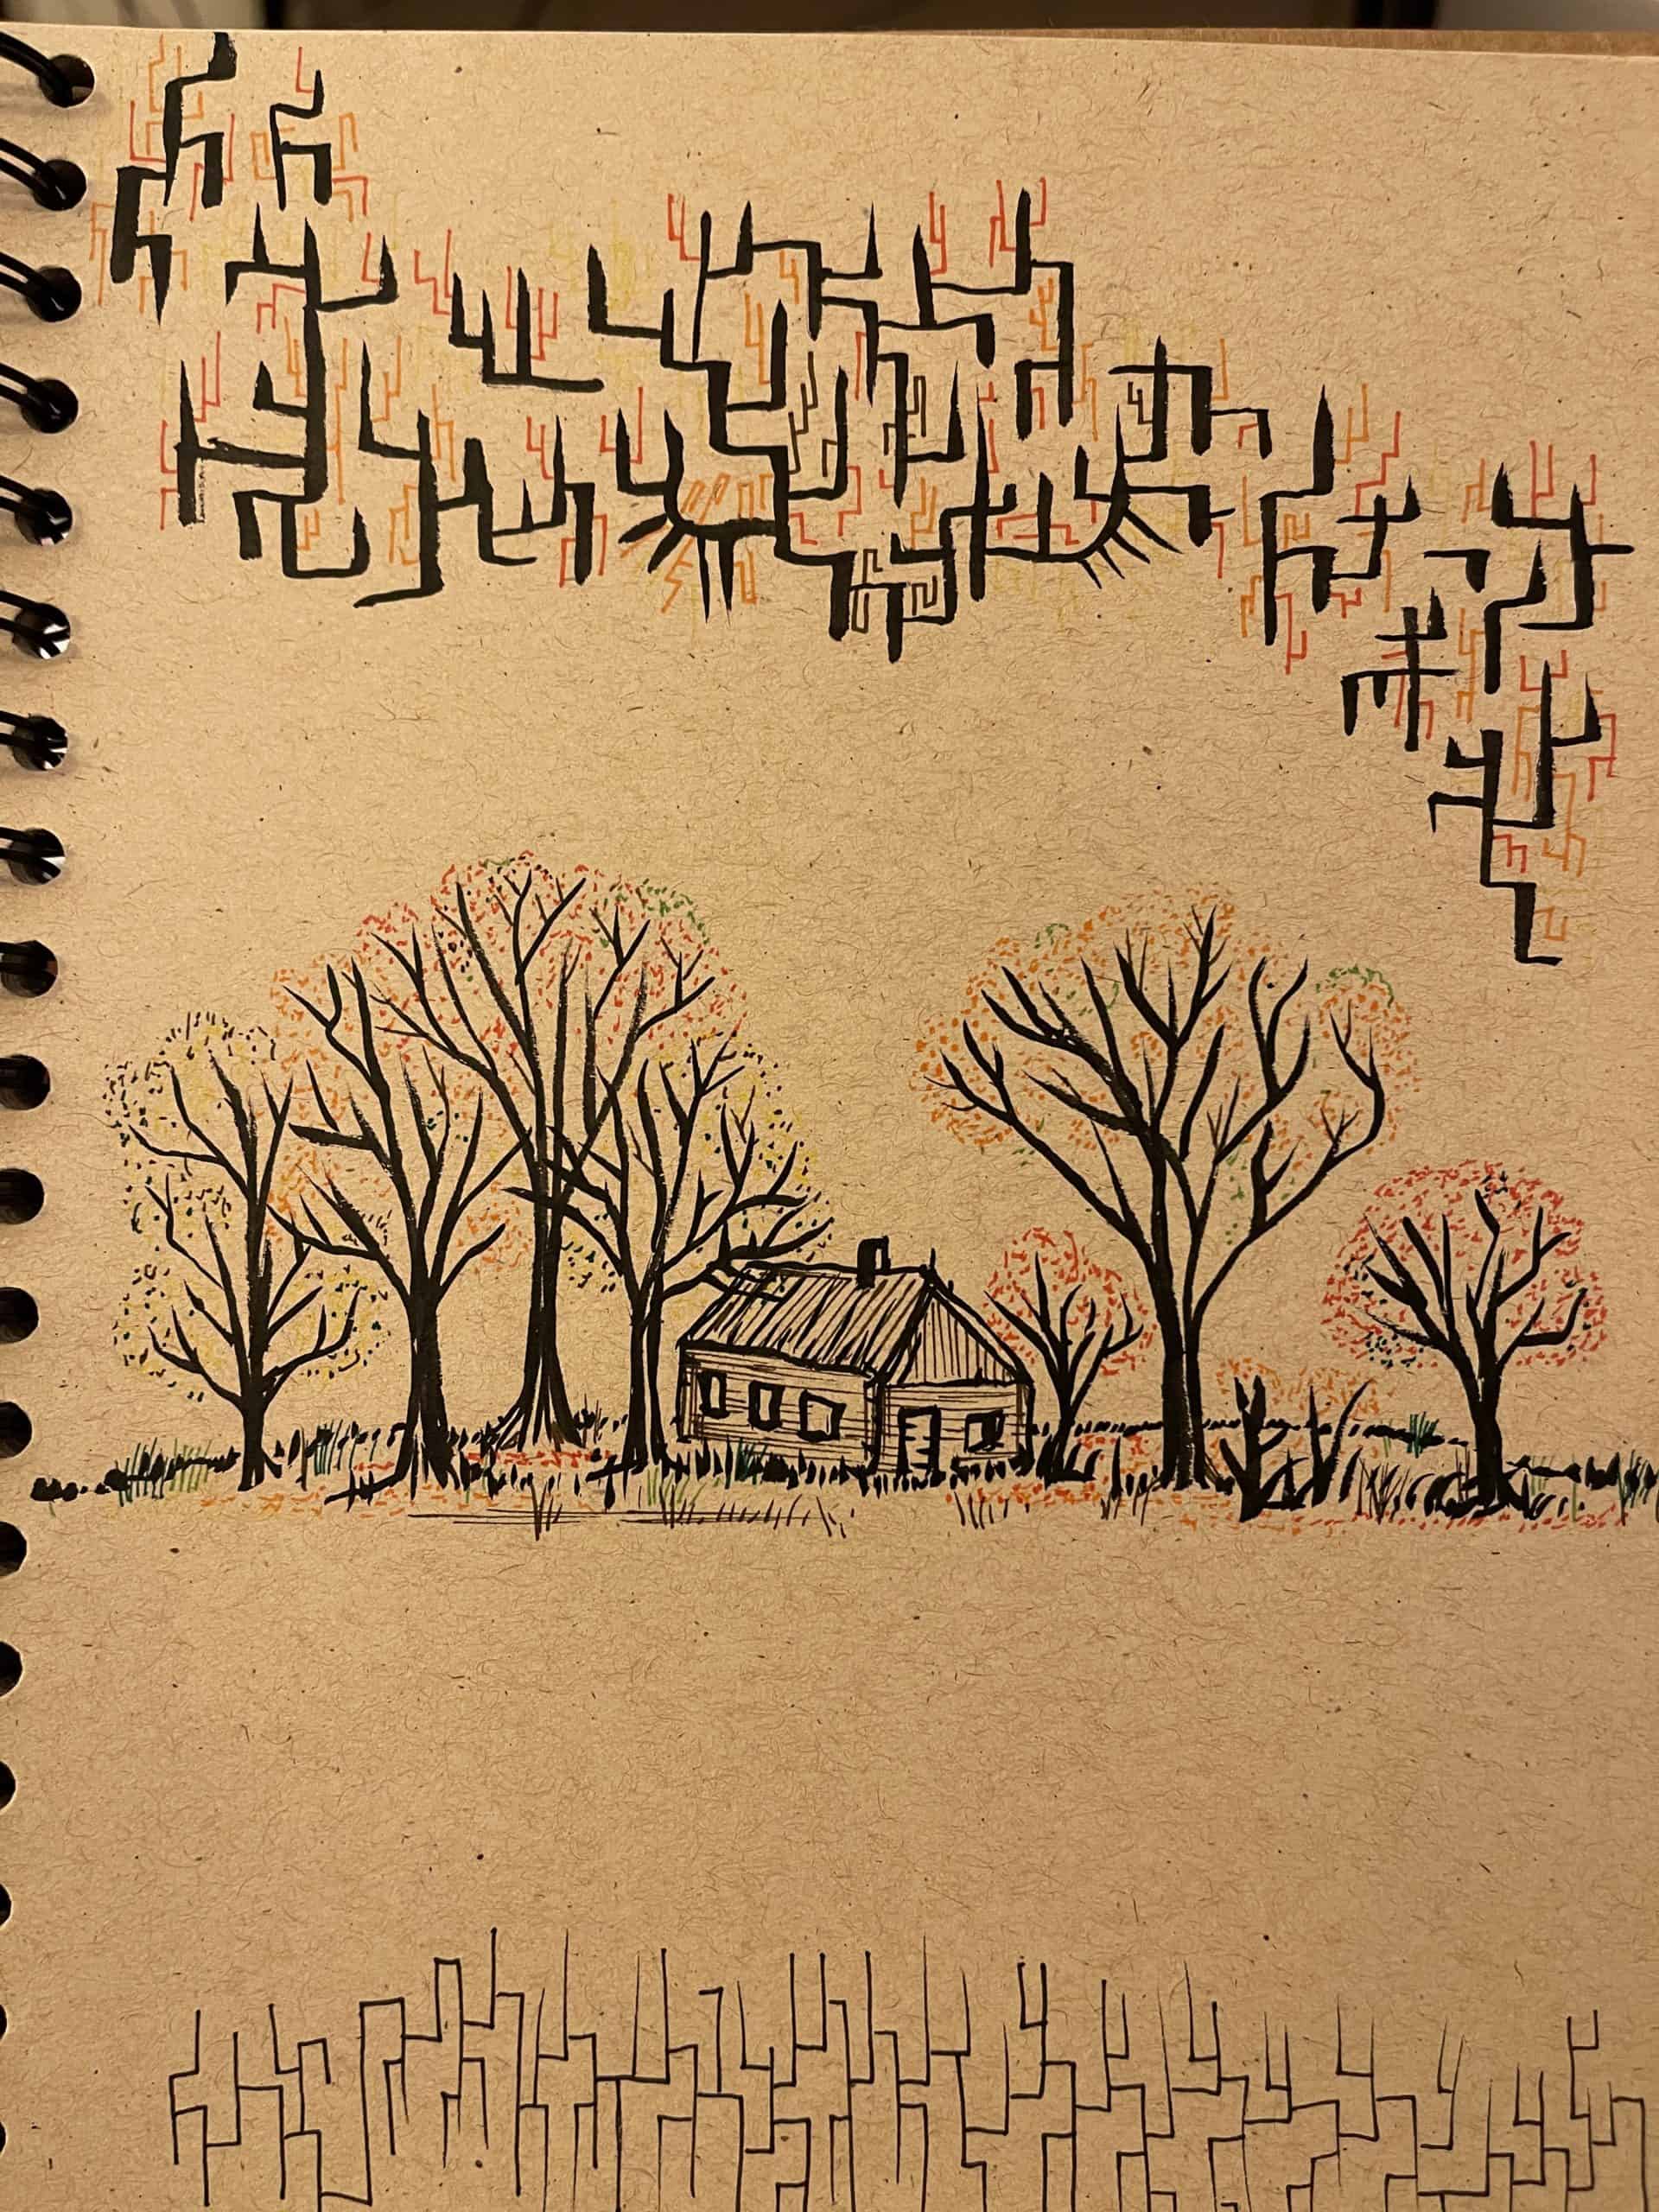 marker doodle of a house